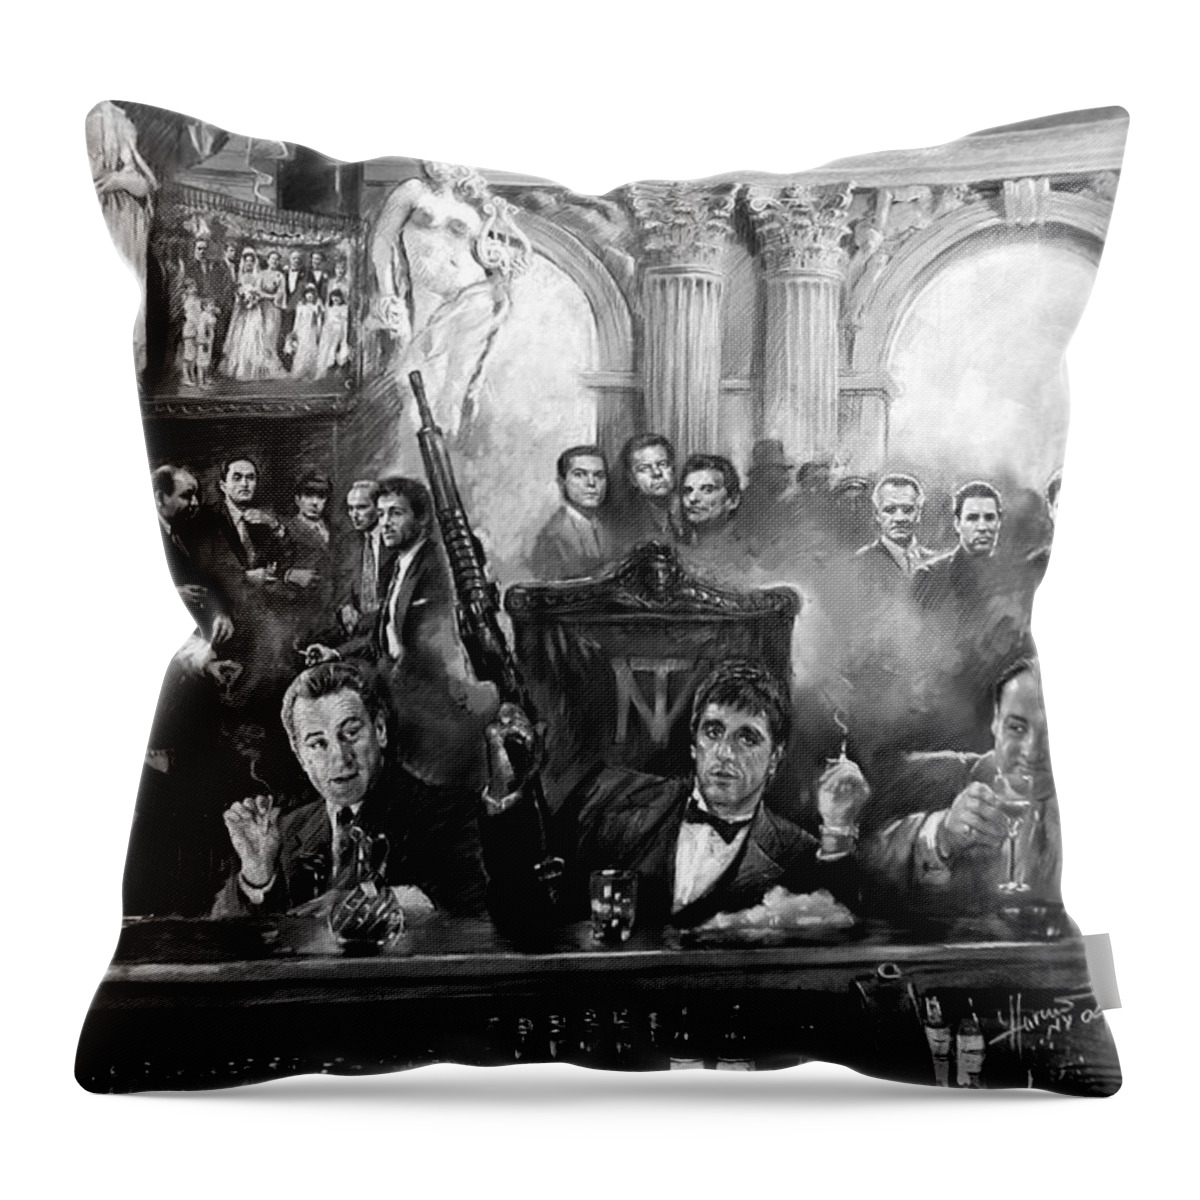 Gangsters Throw Pillow featuring the mixed media Wise Guys by Ylli Haruni